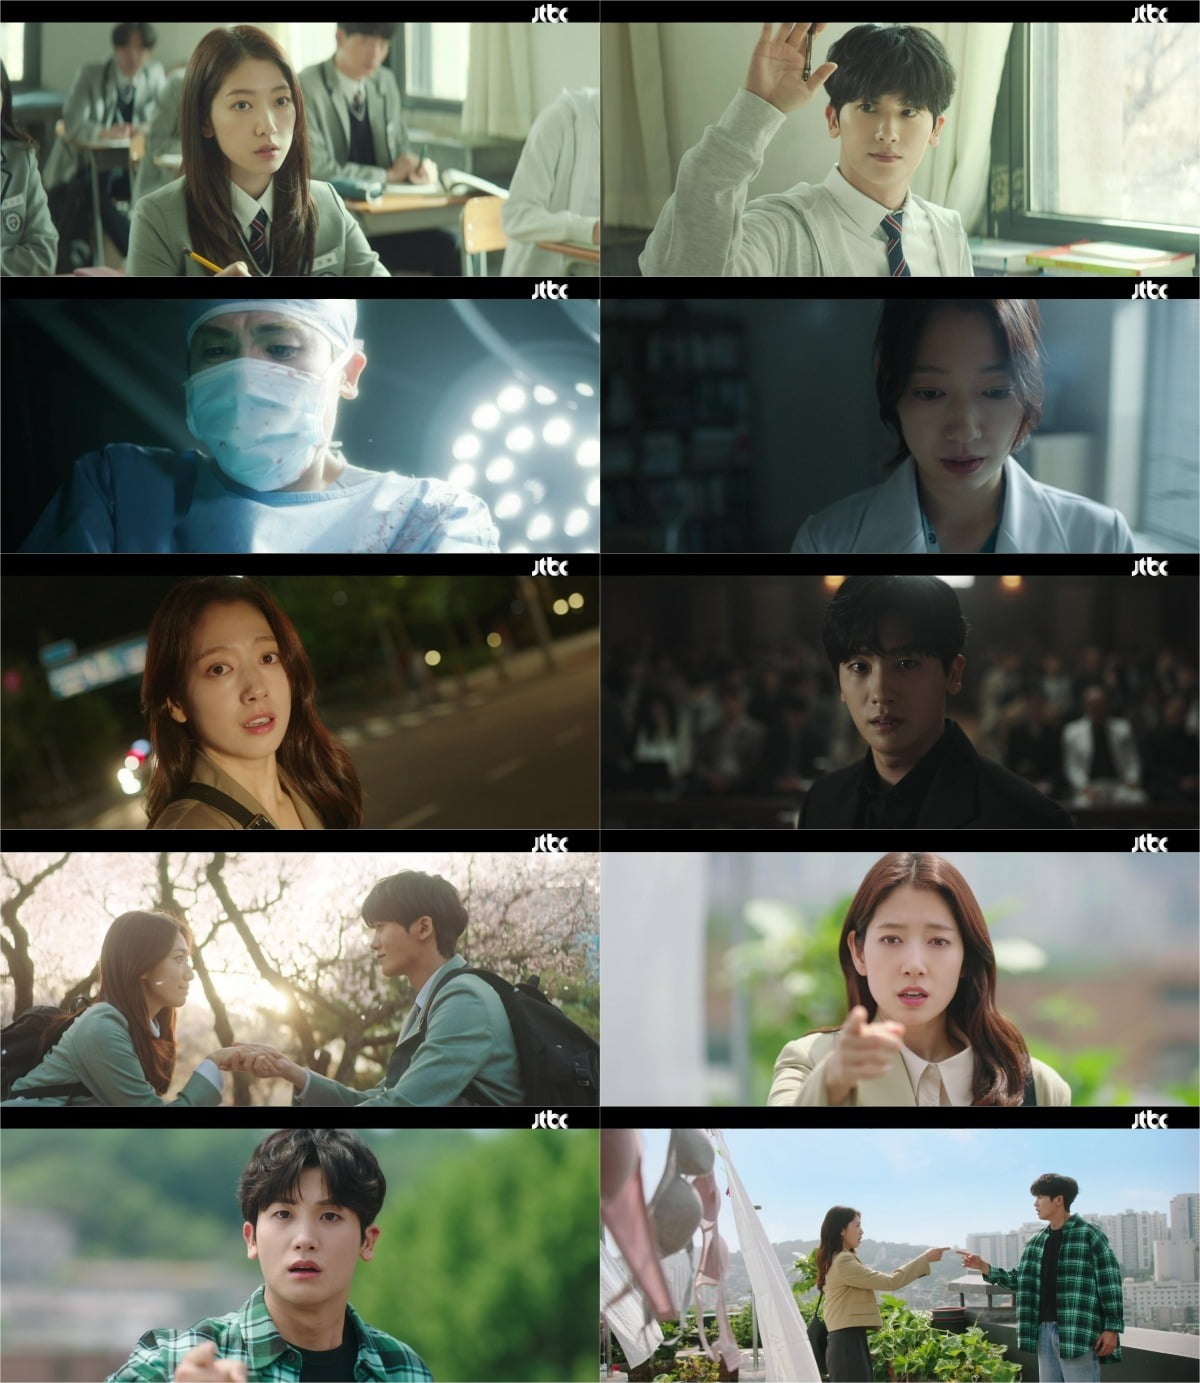 The first episode of Park Shin-hye and Park Hyung-sik's 'Doctor Slump' recorded a viewership rating of 4.1%.